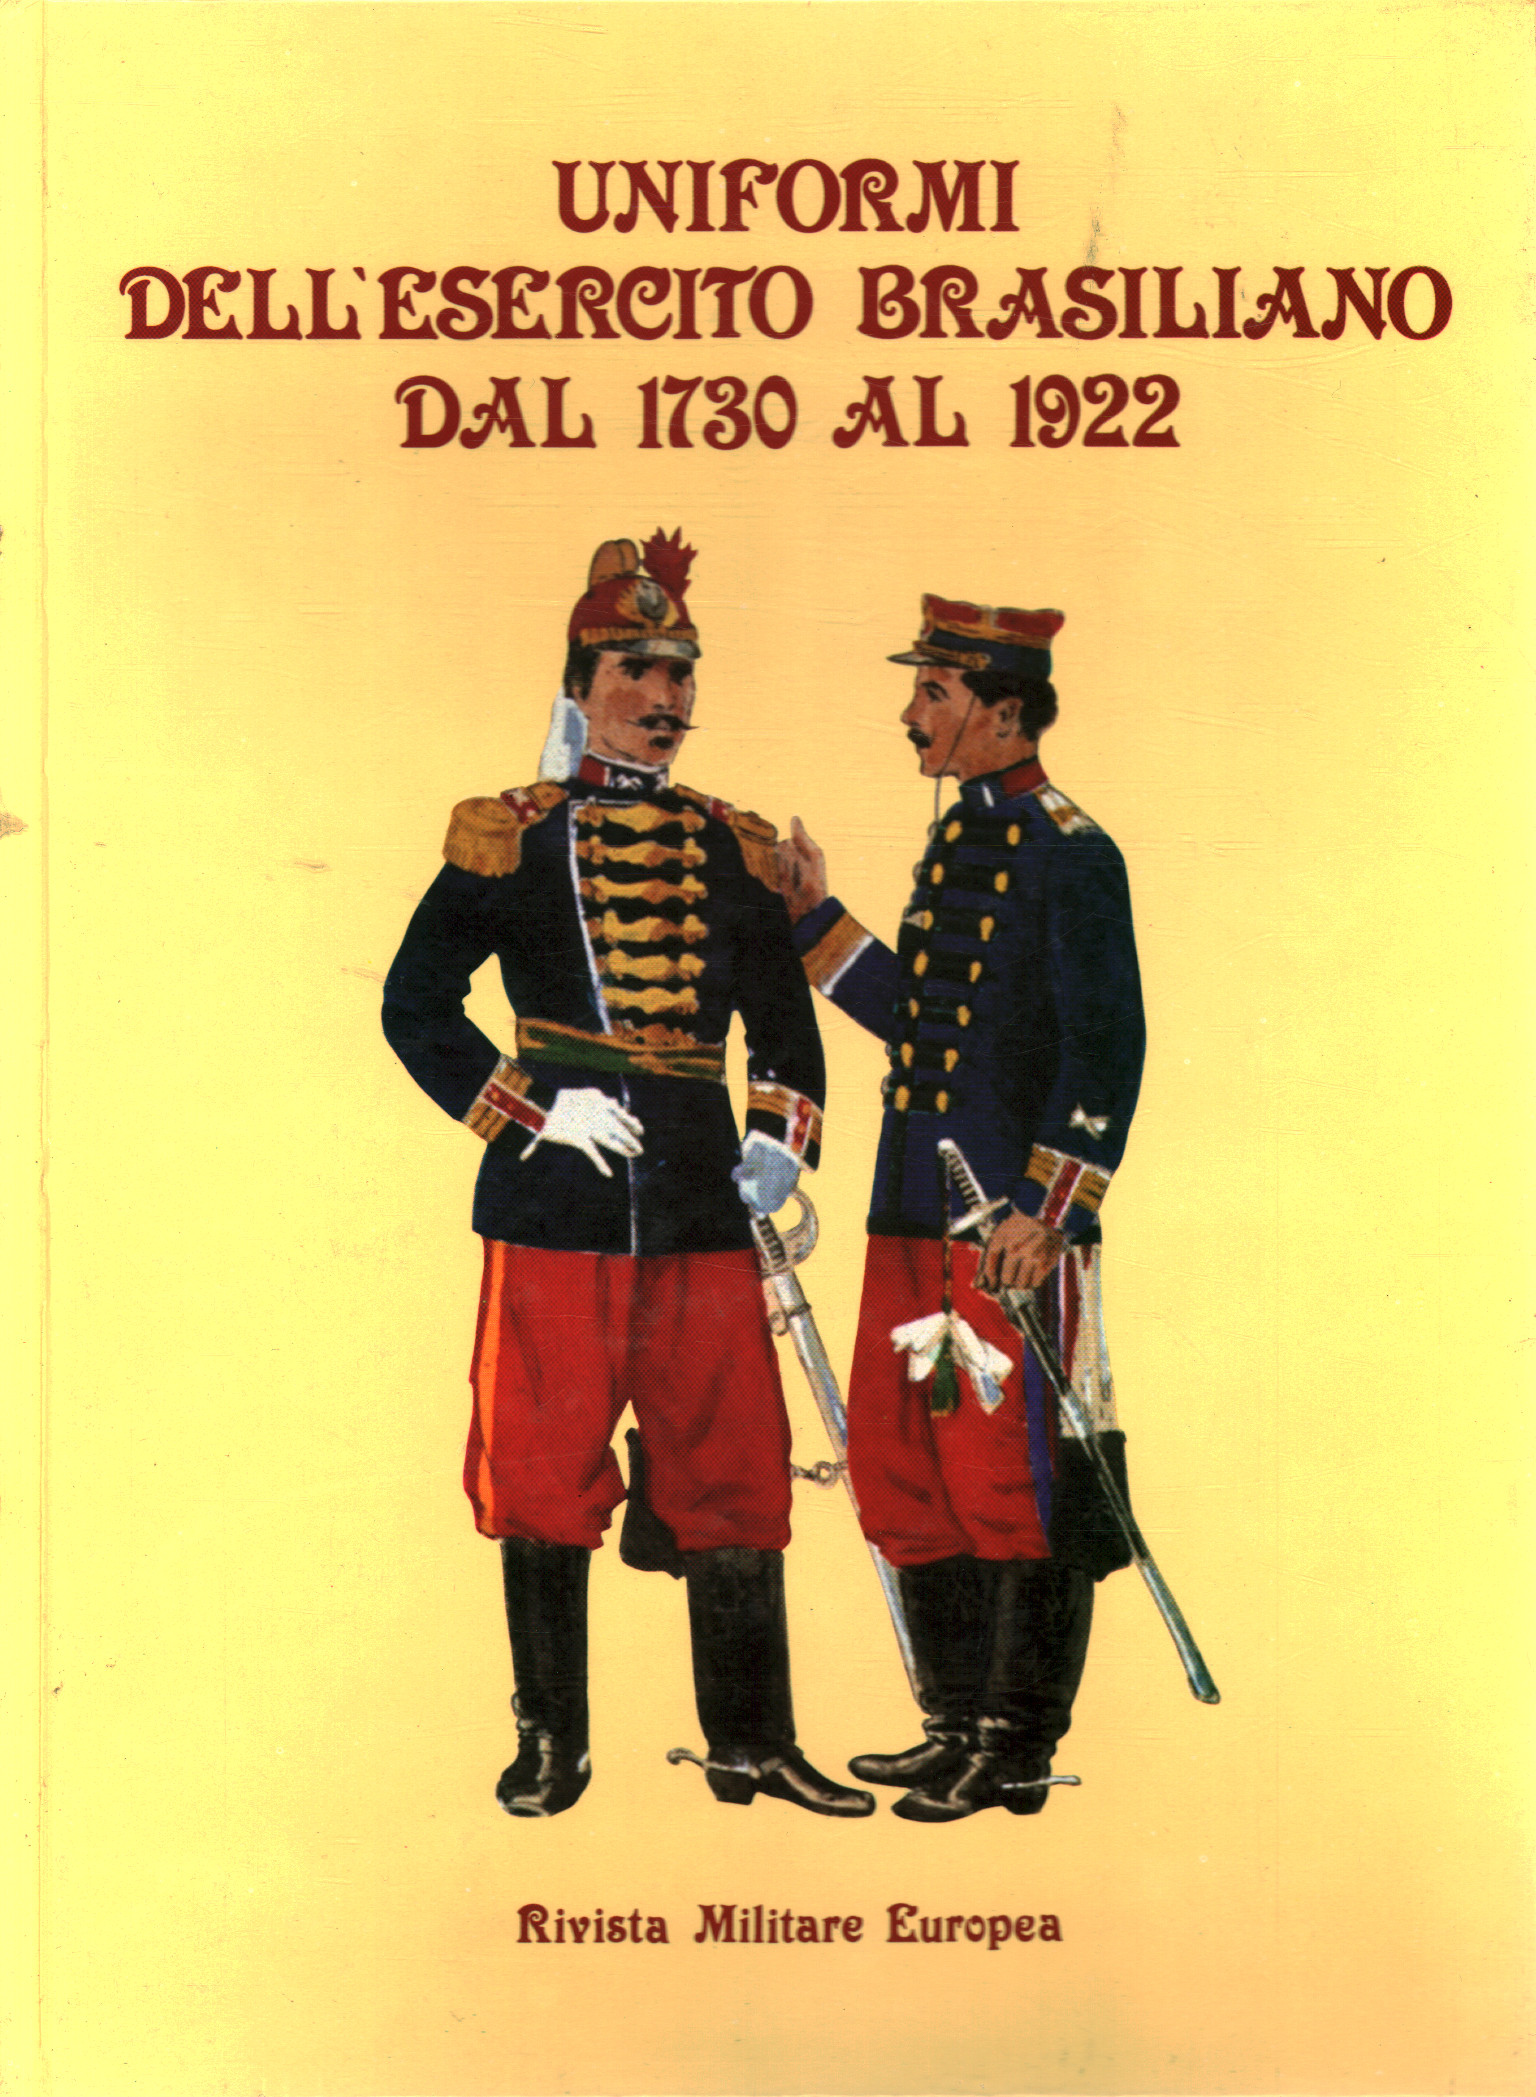 Uniform dell the brazilian army from 1730 to 1922, AA.VV